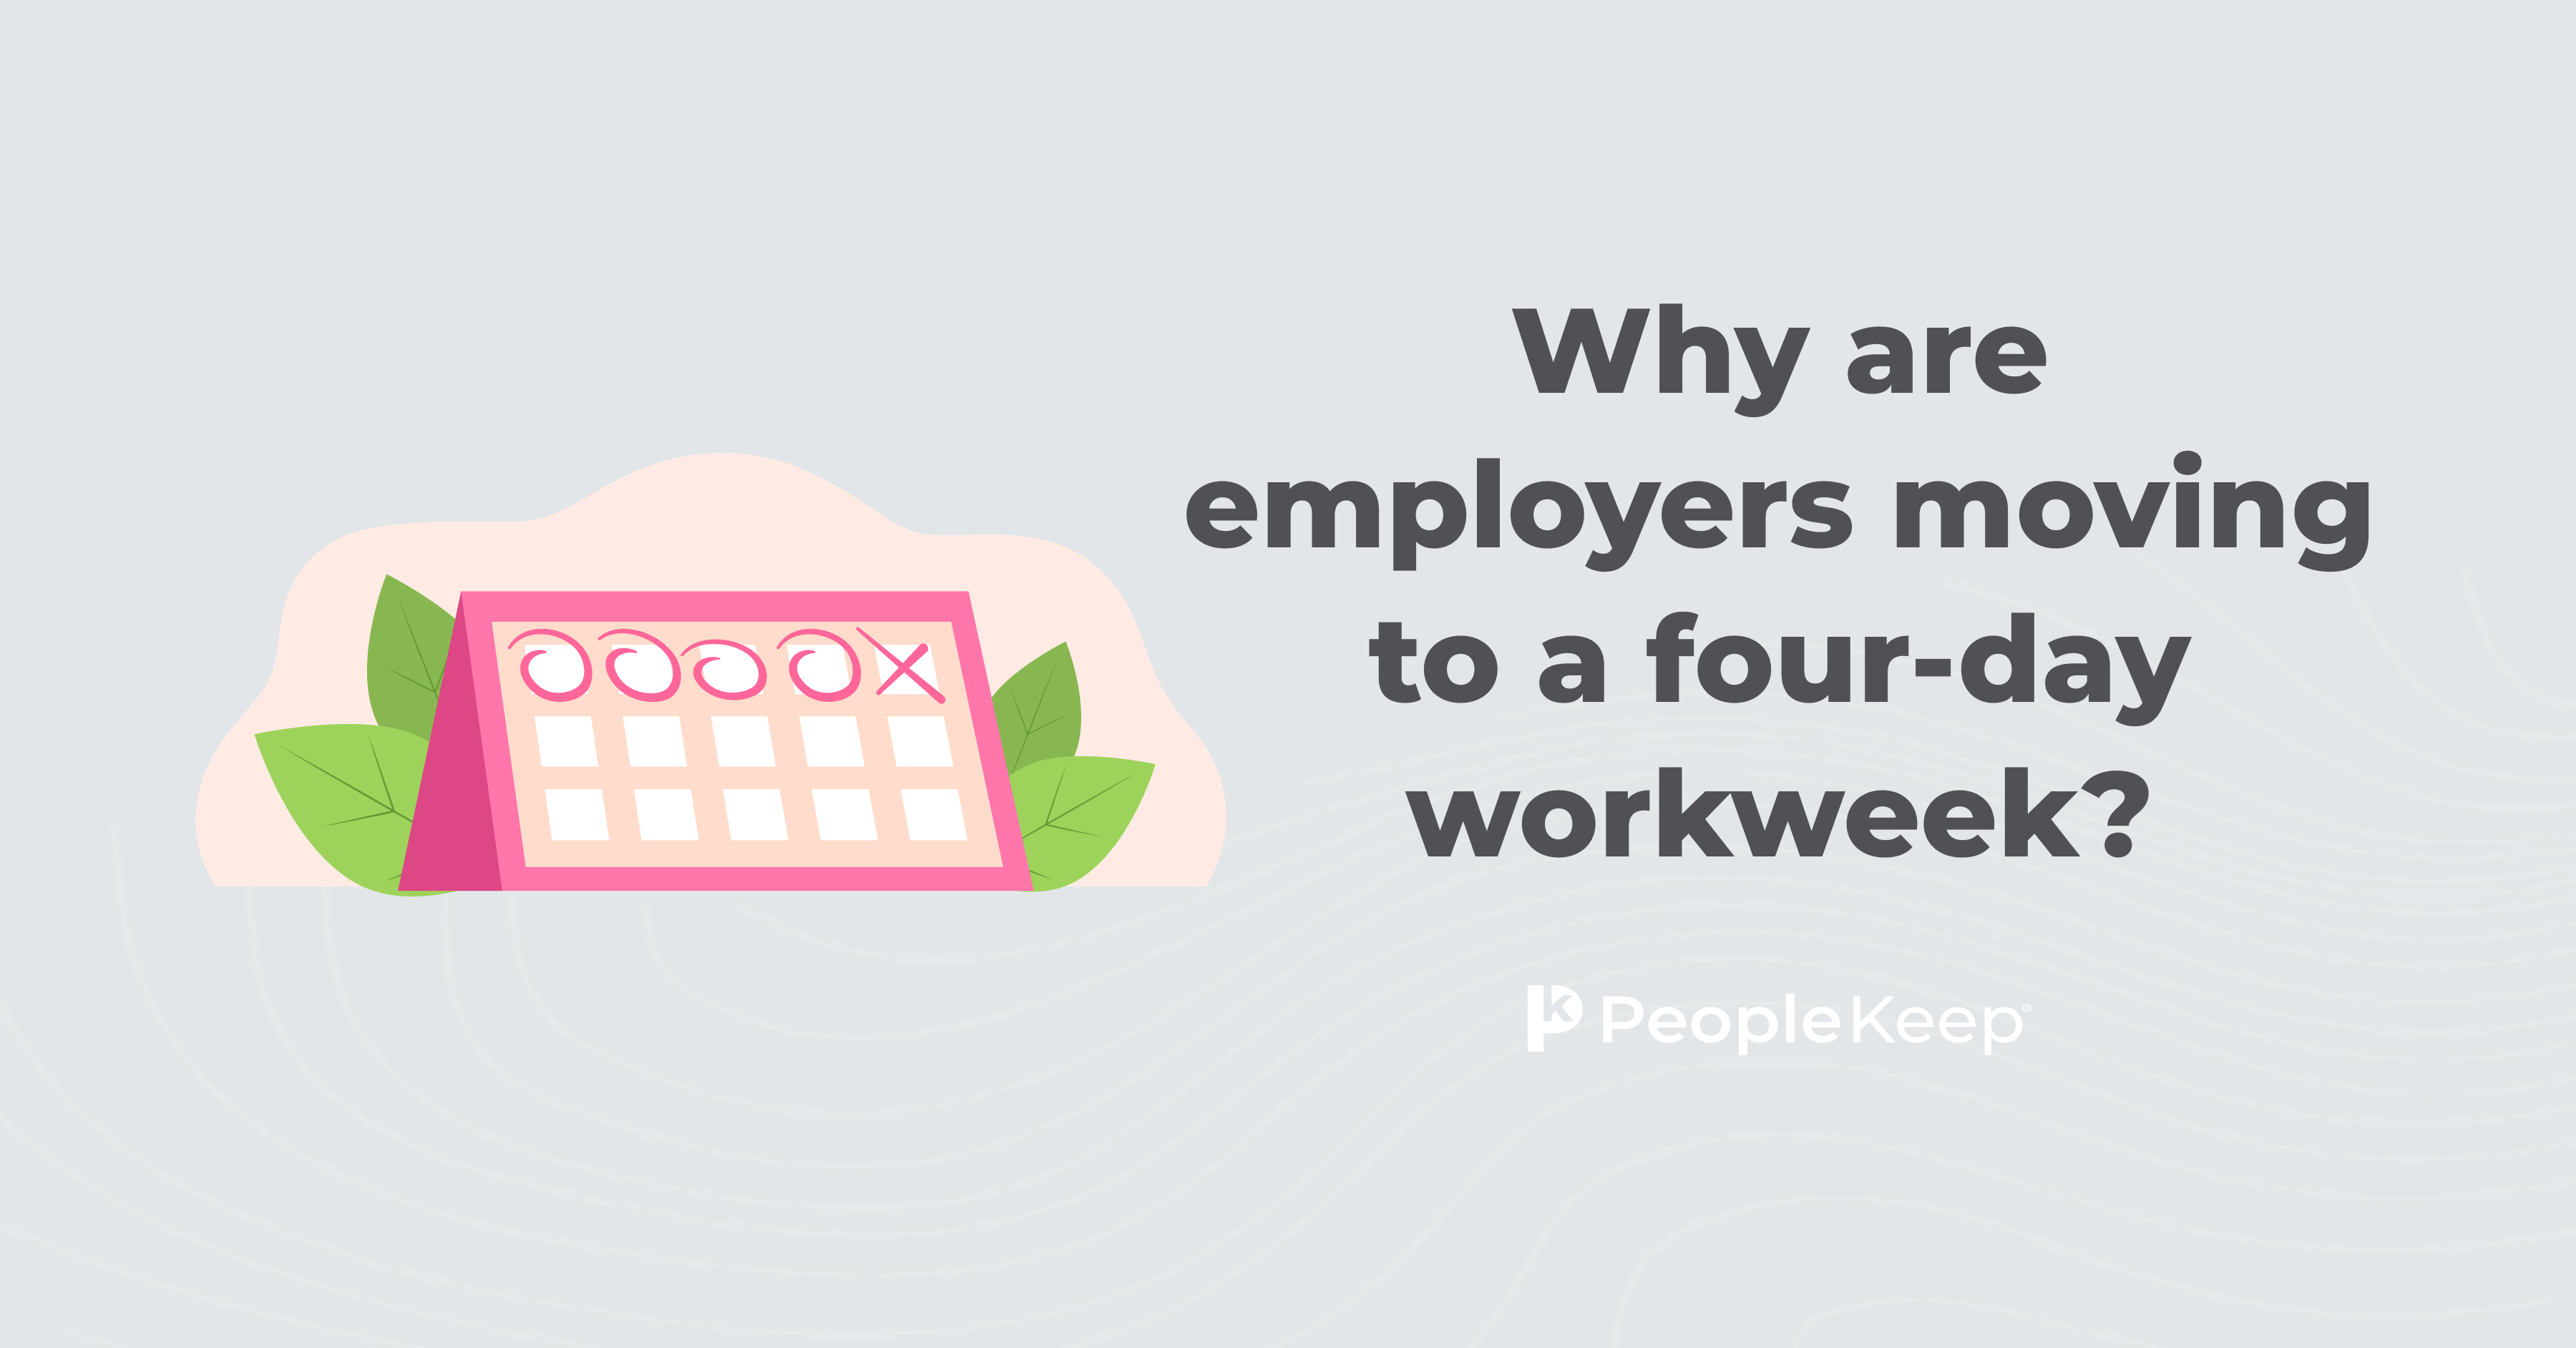 Why are employers moving to a four-day workweek?